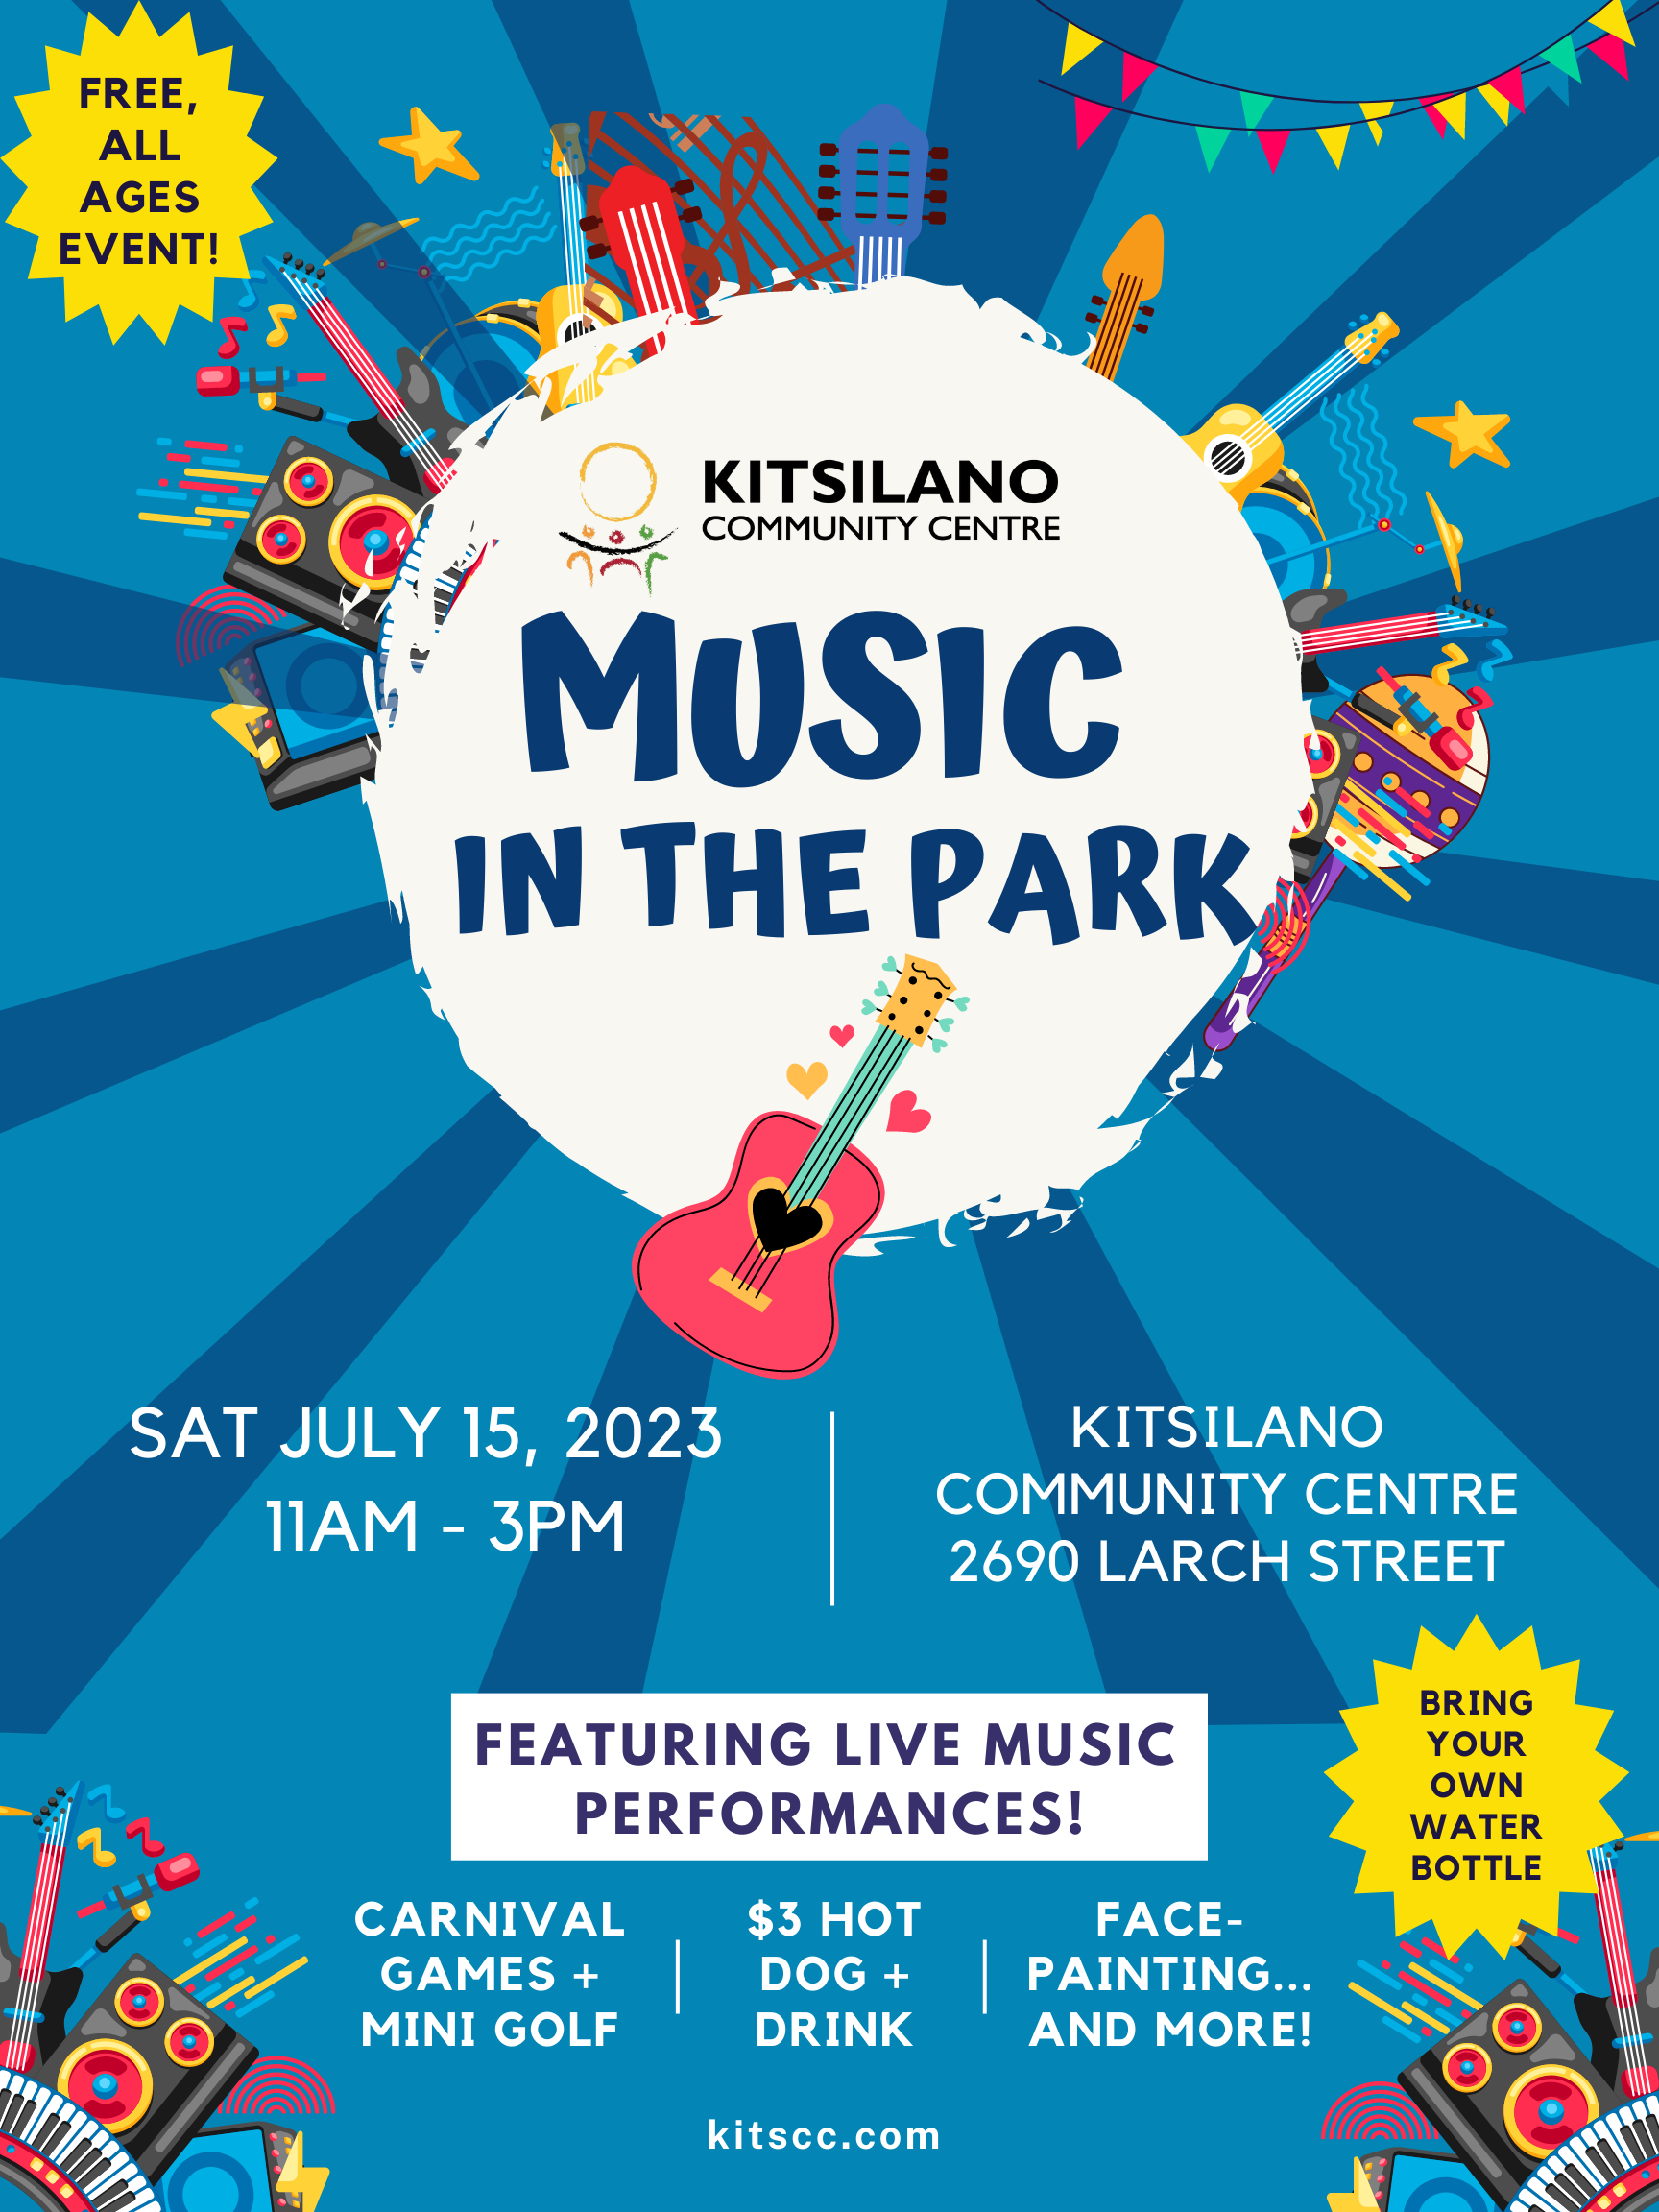 Music in the park Sat July 15, 2023 kitsilano community centre 2690 larch street 11am - 3pm Featuring live music performances! Bring your own water bottle Carnival games + mini golf $3 hot dog + drink Face-painting... And more! 